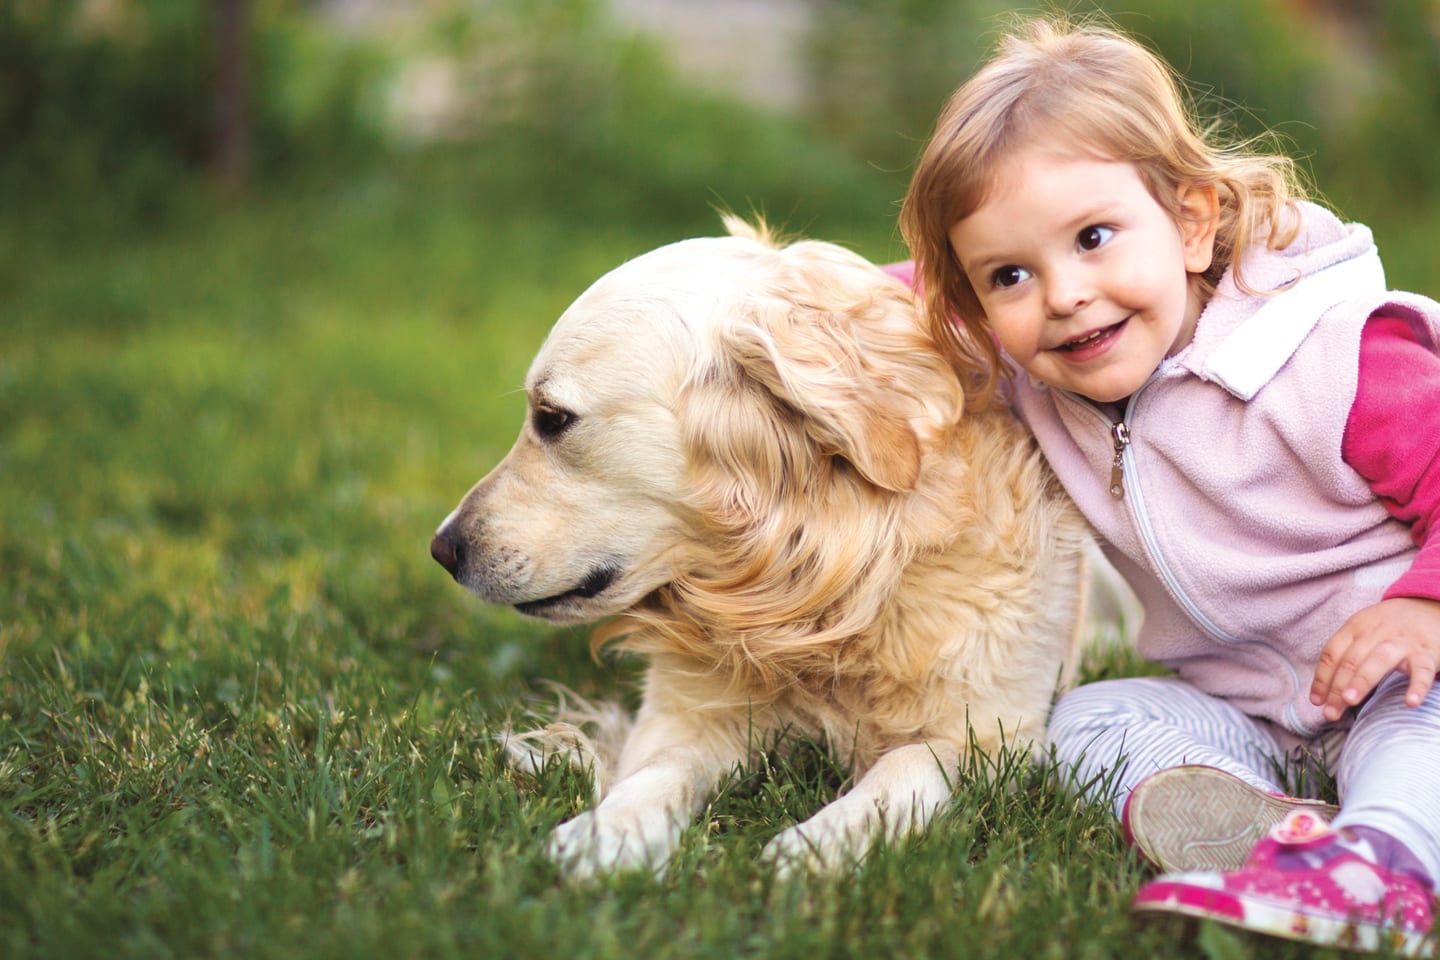 little girl sitting outside with her arm around a dog